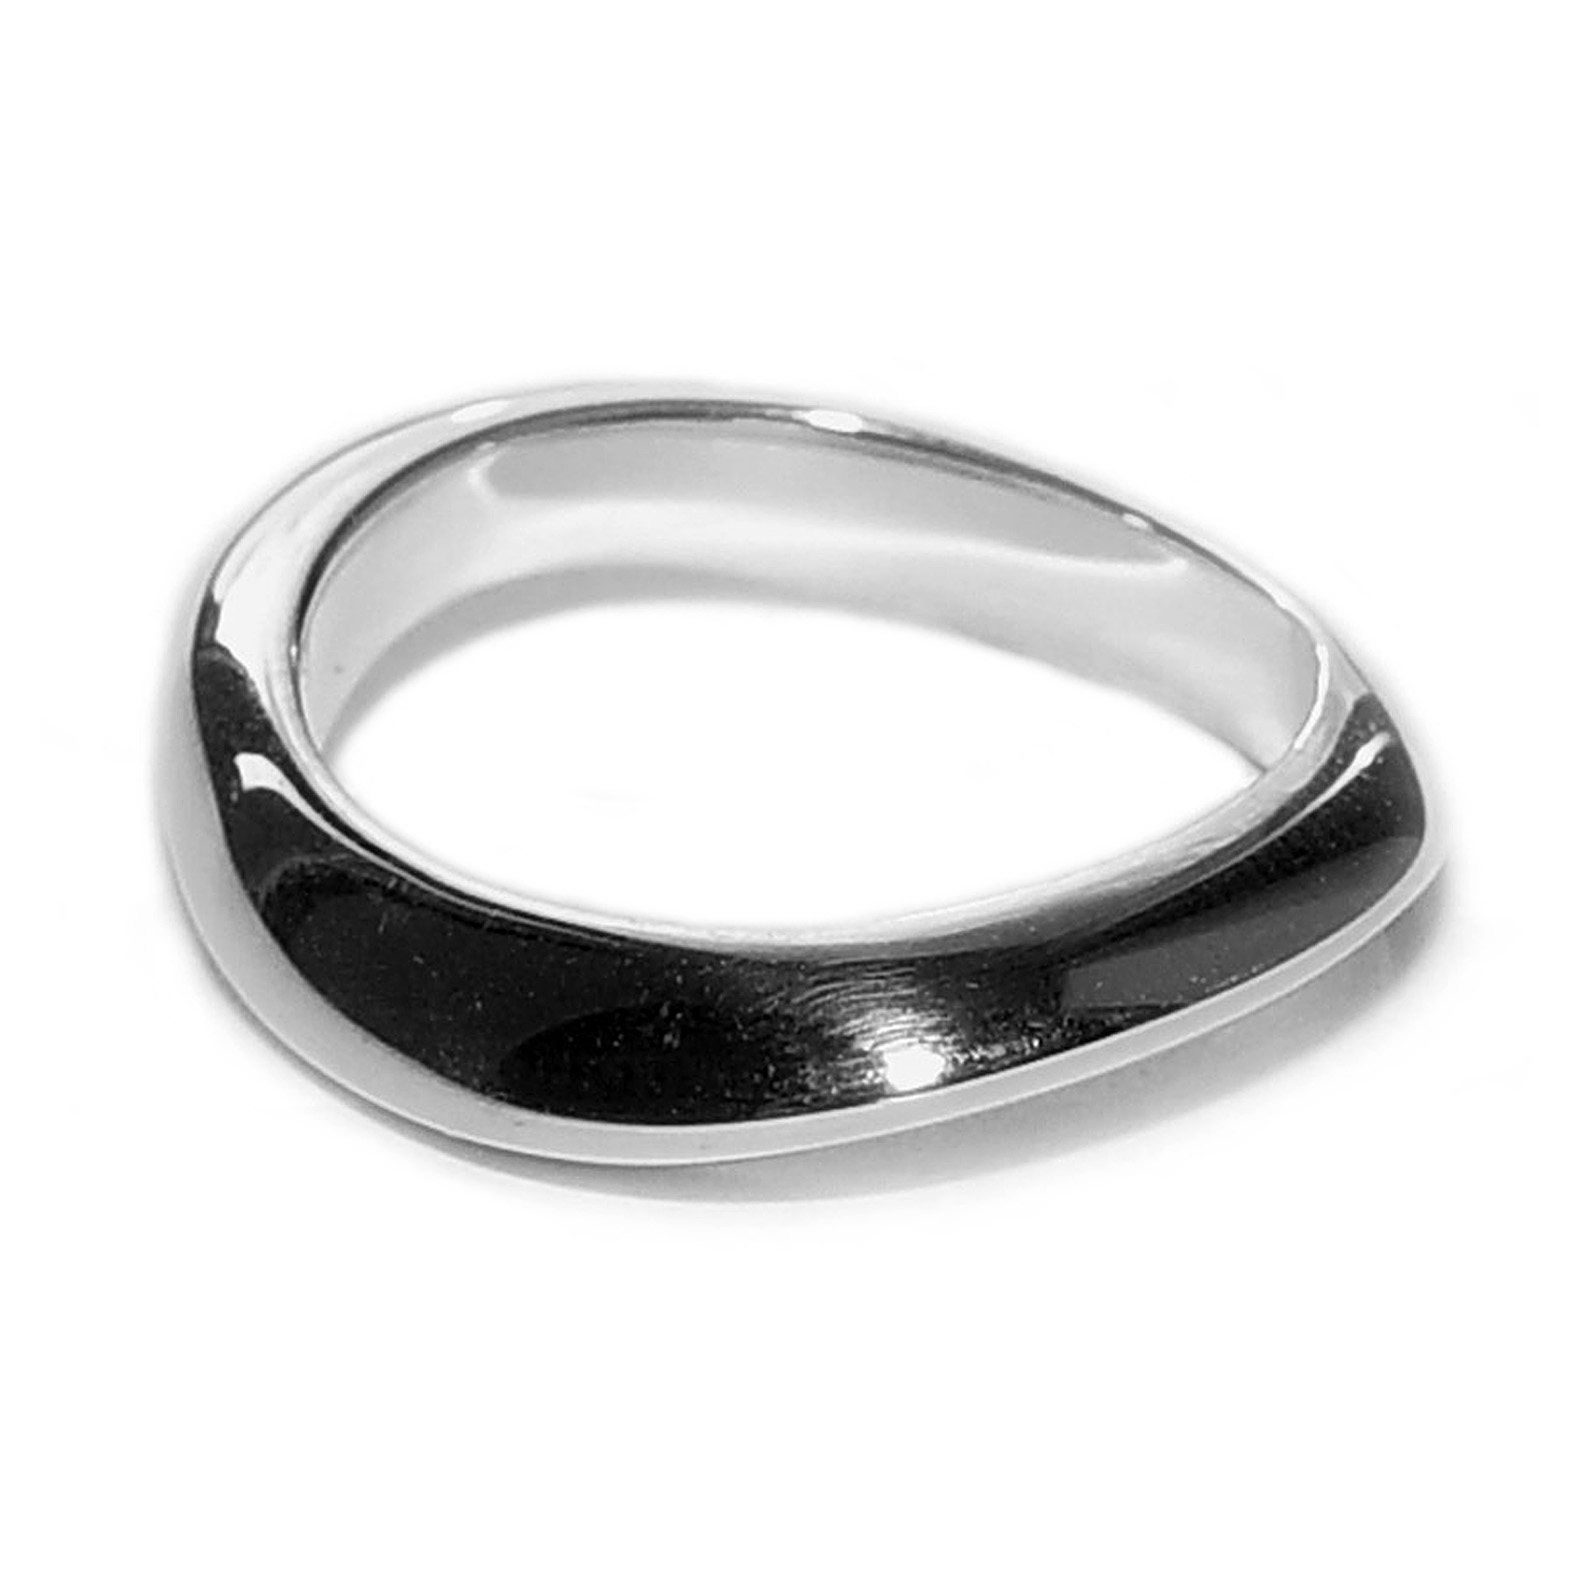 Shell Wedding Band 4mm | Rings by Paul Finch